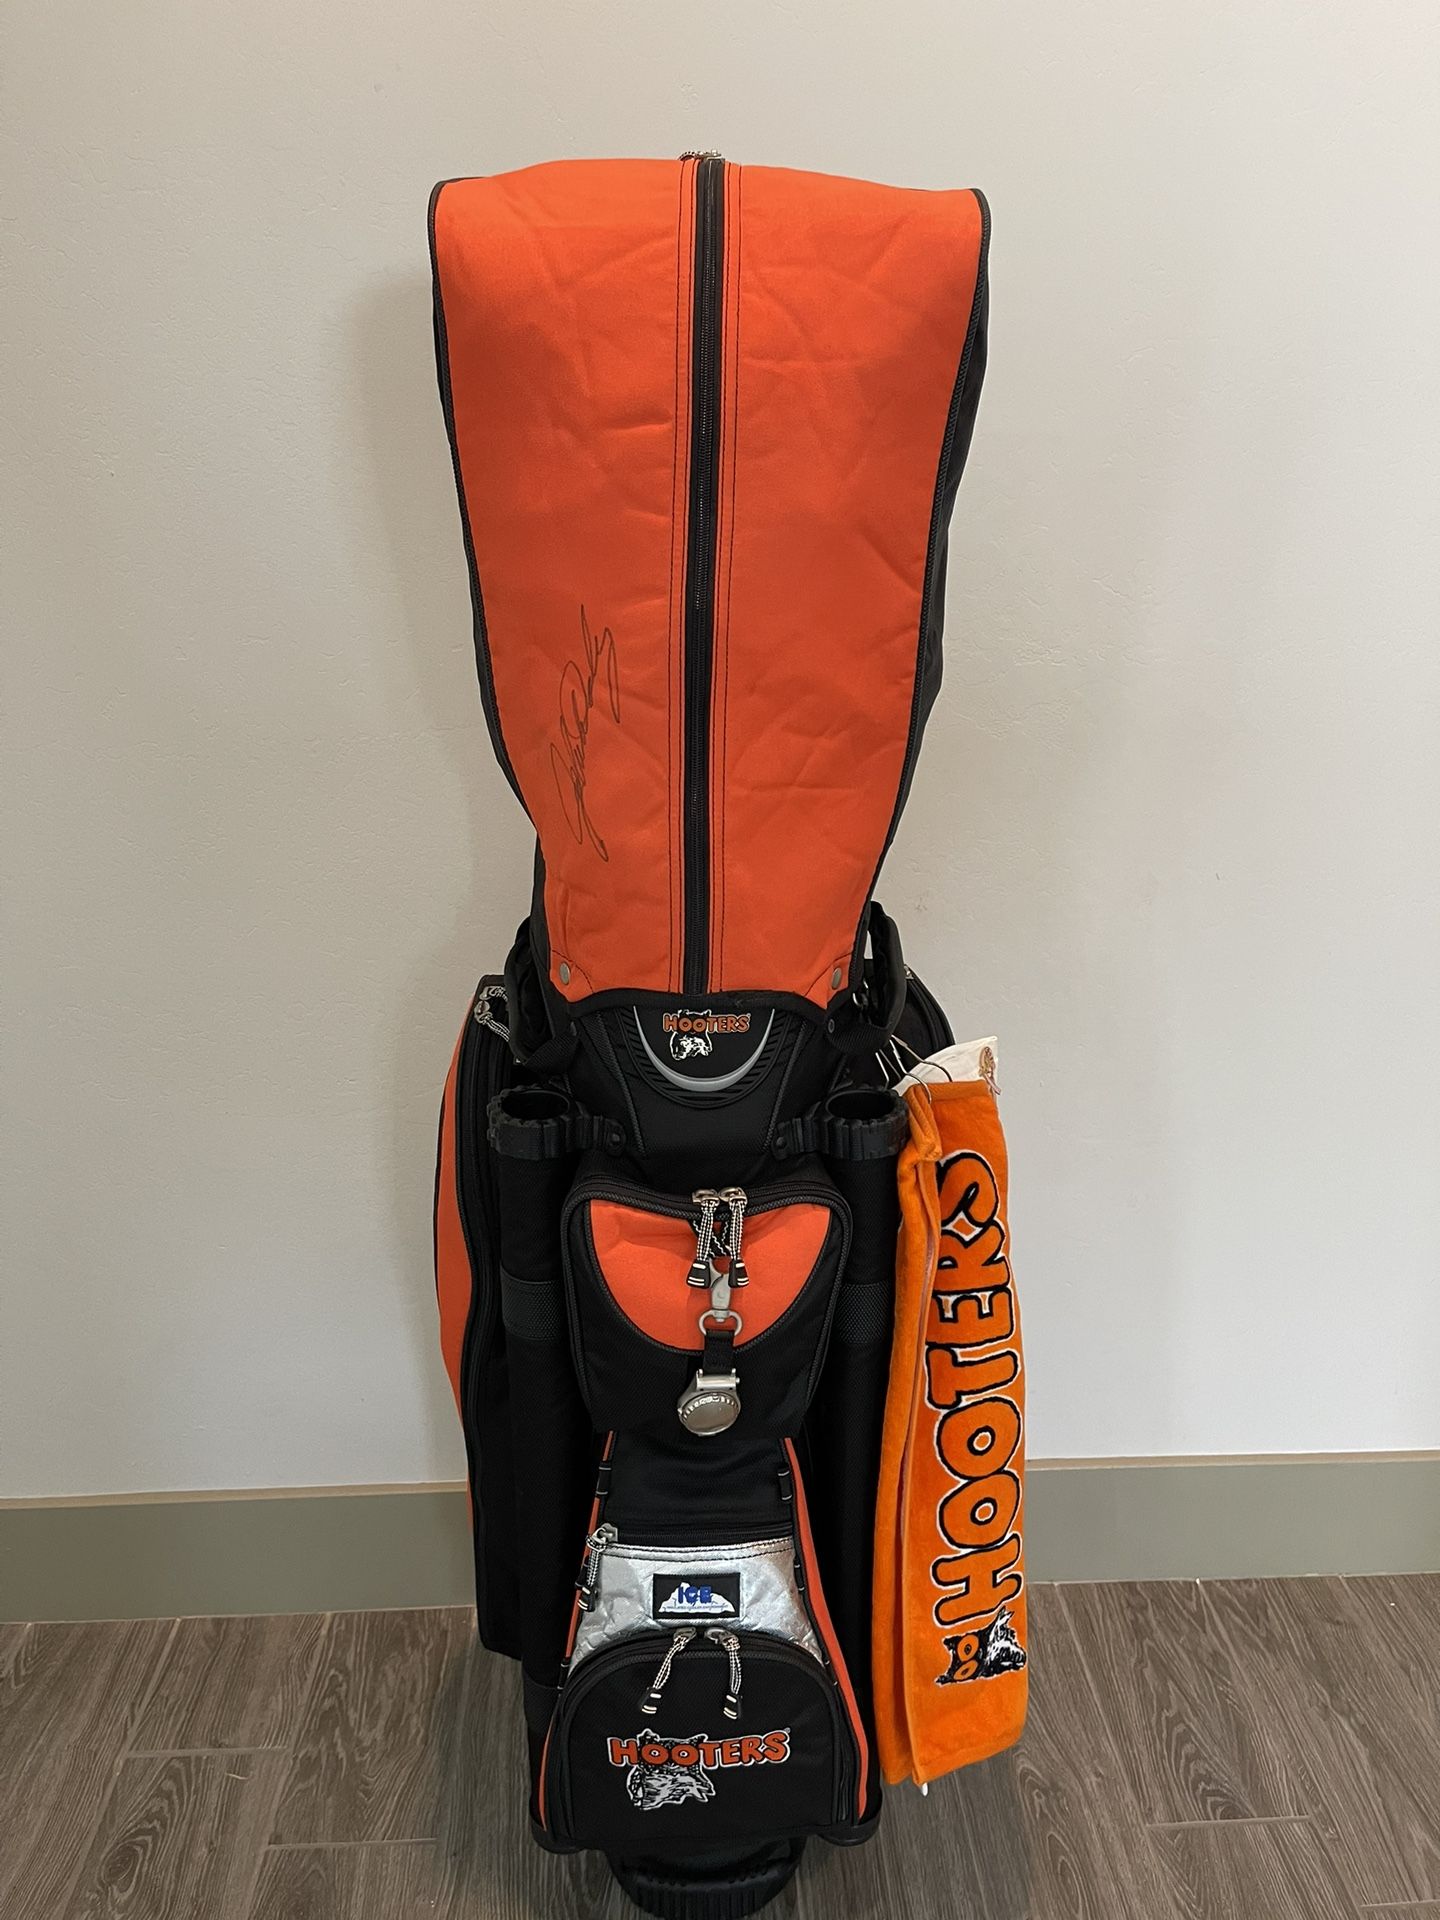 Hooters Restaurant DATREK Golf Bag Signed By John Daly 